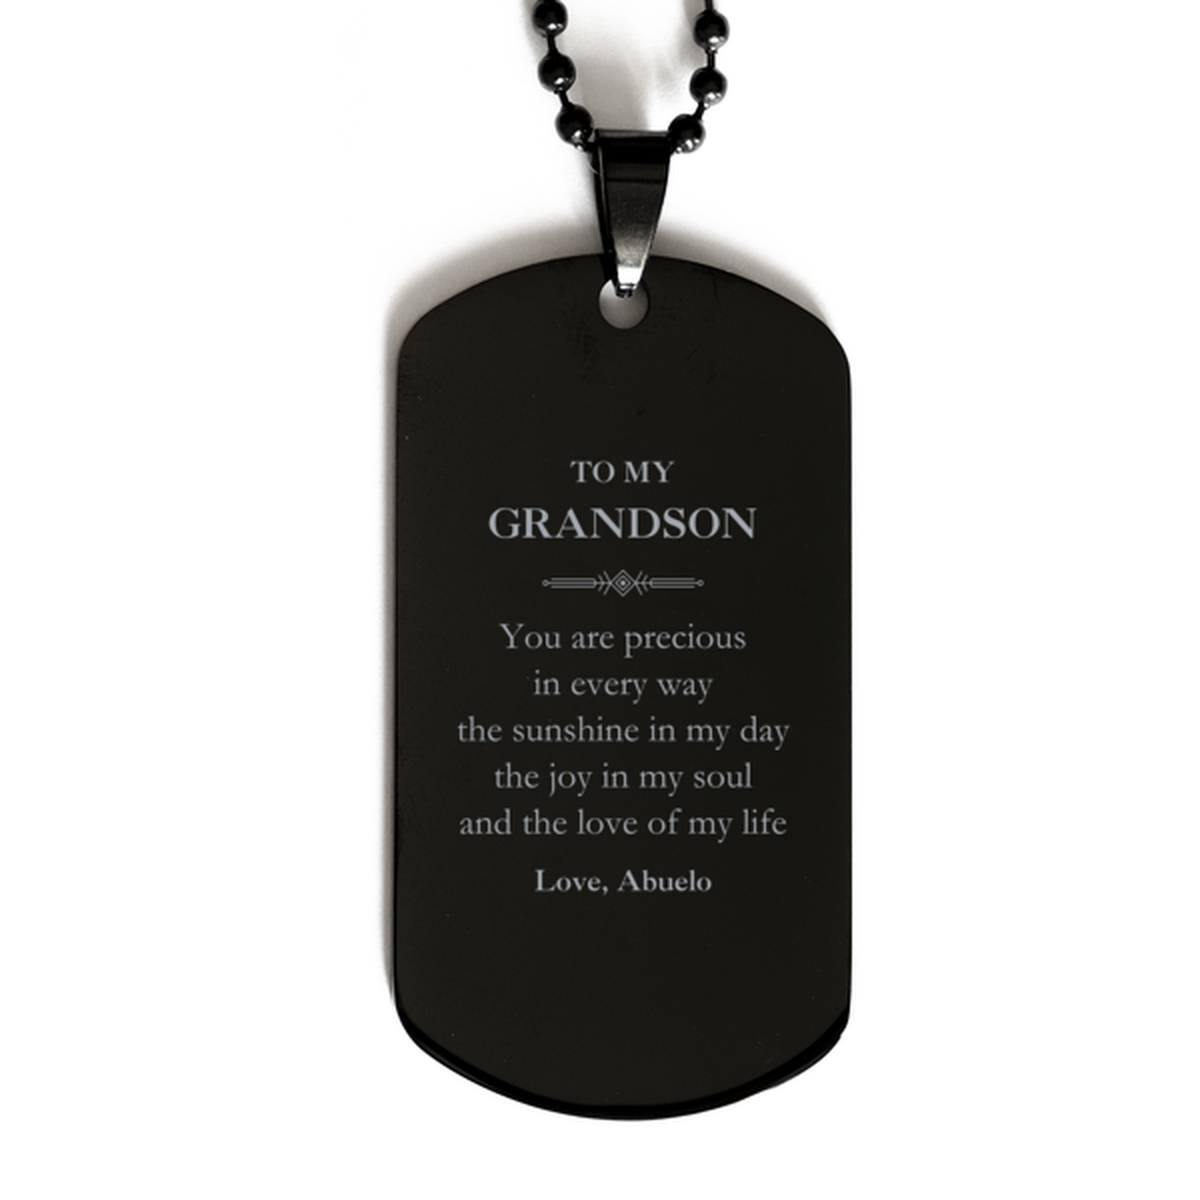 Graduation Gifts for Grandson Black Dog Tag Present from Abuelo, Christmas Grandson Birthday Gifts Grandson You are precious in every way the sunshine in my day. Love, Abuelo